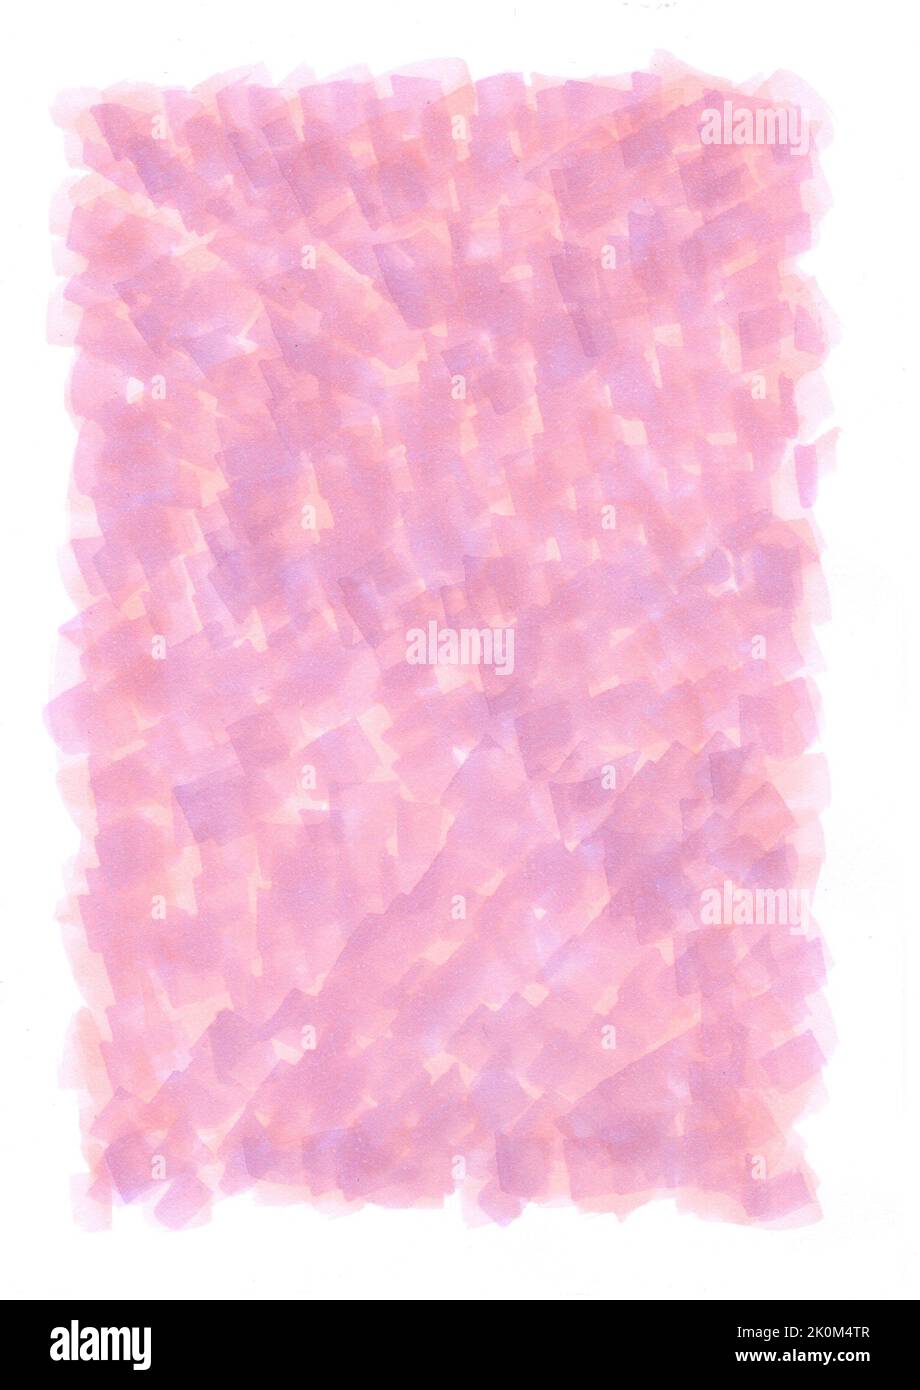 Abstract art panel in pink on a white background. Stock Photo